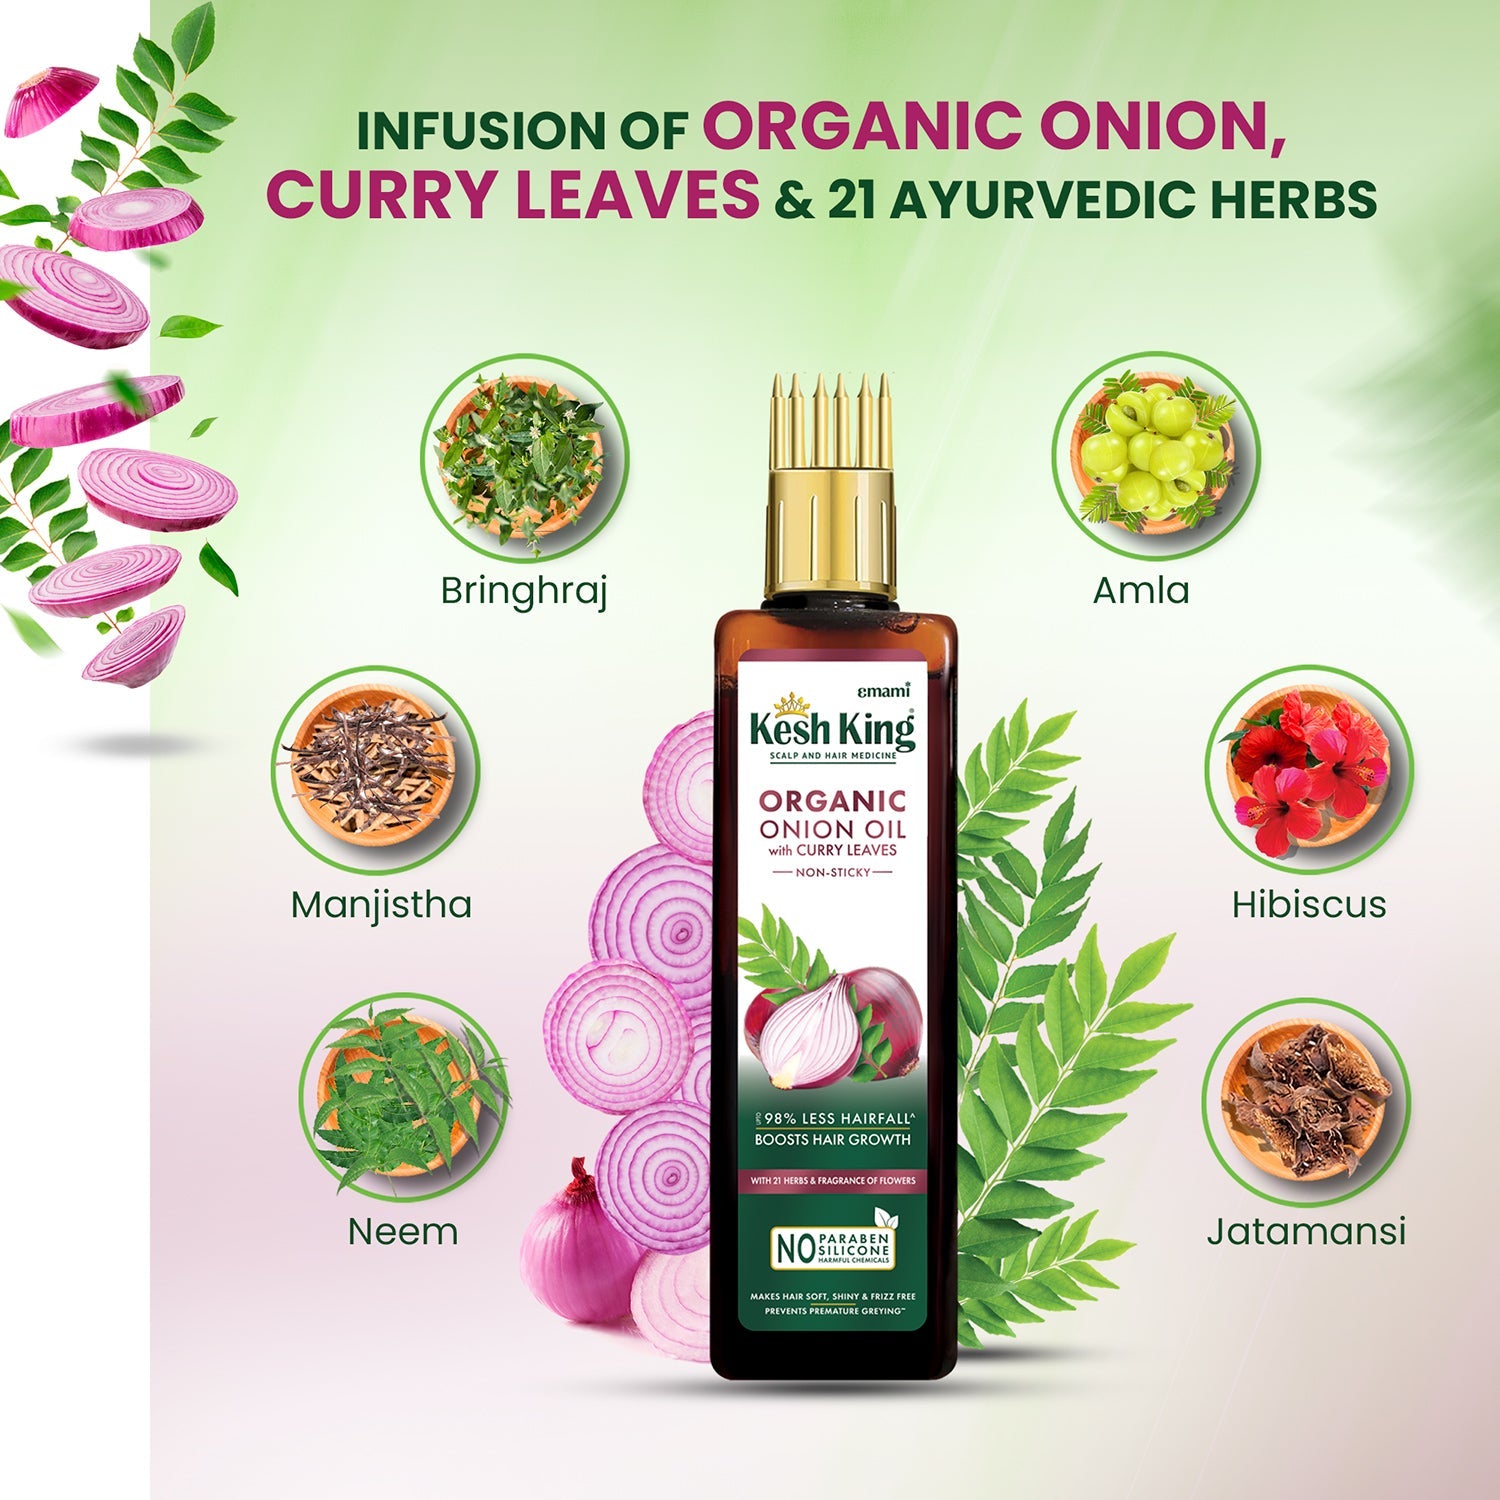 Kesh King Organic Onion Oil With Curry Leaves Reduces Hair Fall Upto 98% and Boosts Hair Growth | Non-Sticky Formula | Fragrance of Flowers | Goodness of Onion, Curry Leaves, Amla & Bhringraj - 200ml